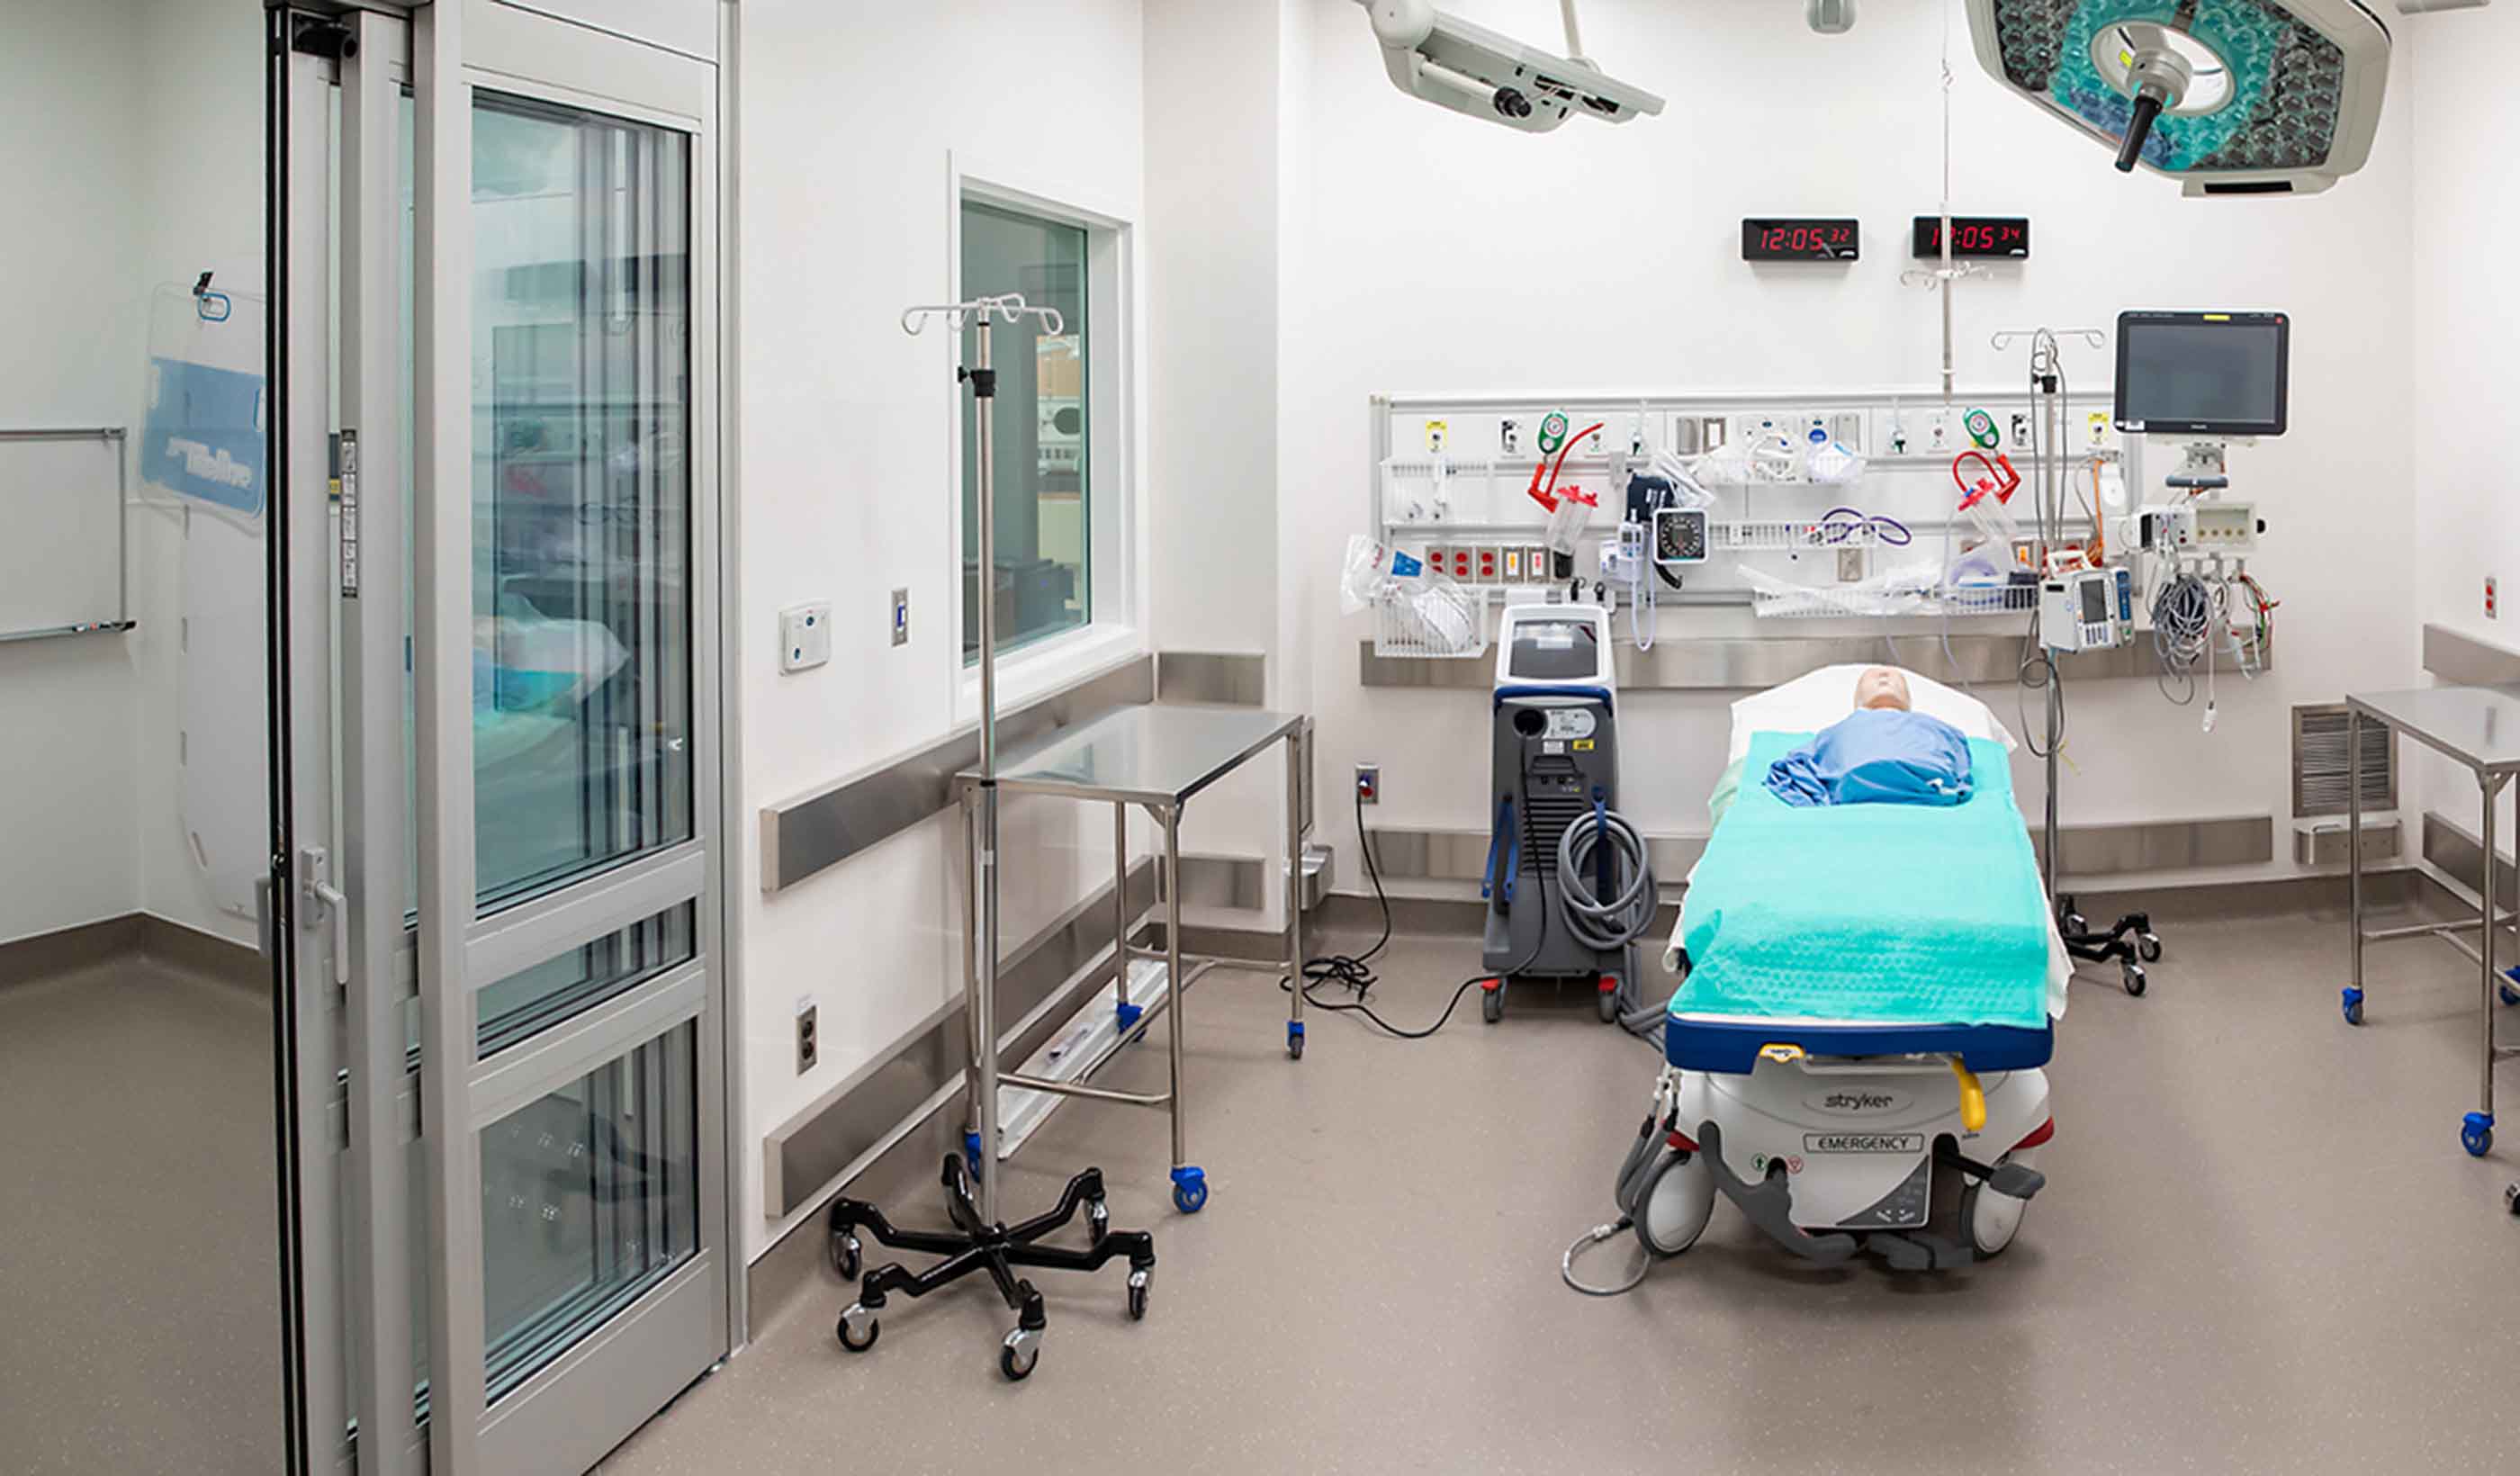 Rethinking resuscitation rooms: A new approach for a vital healthcare space